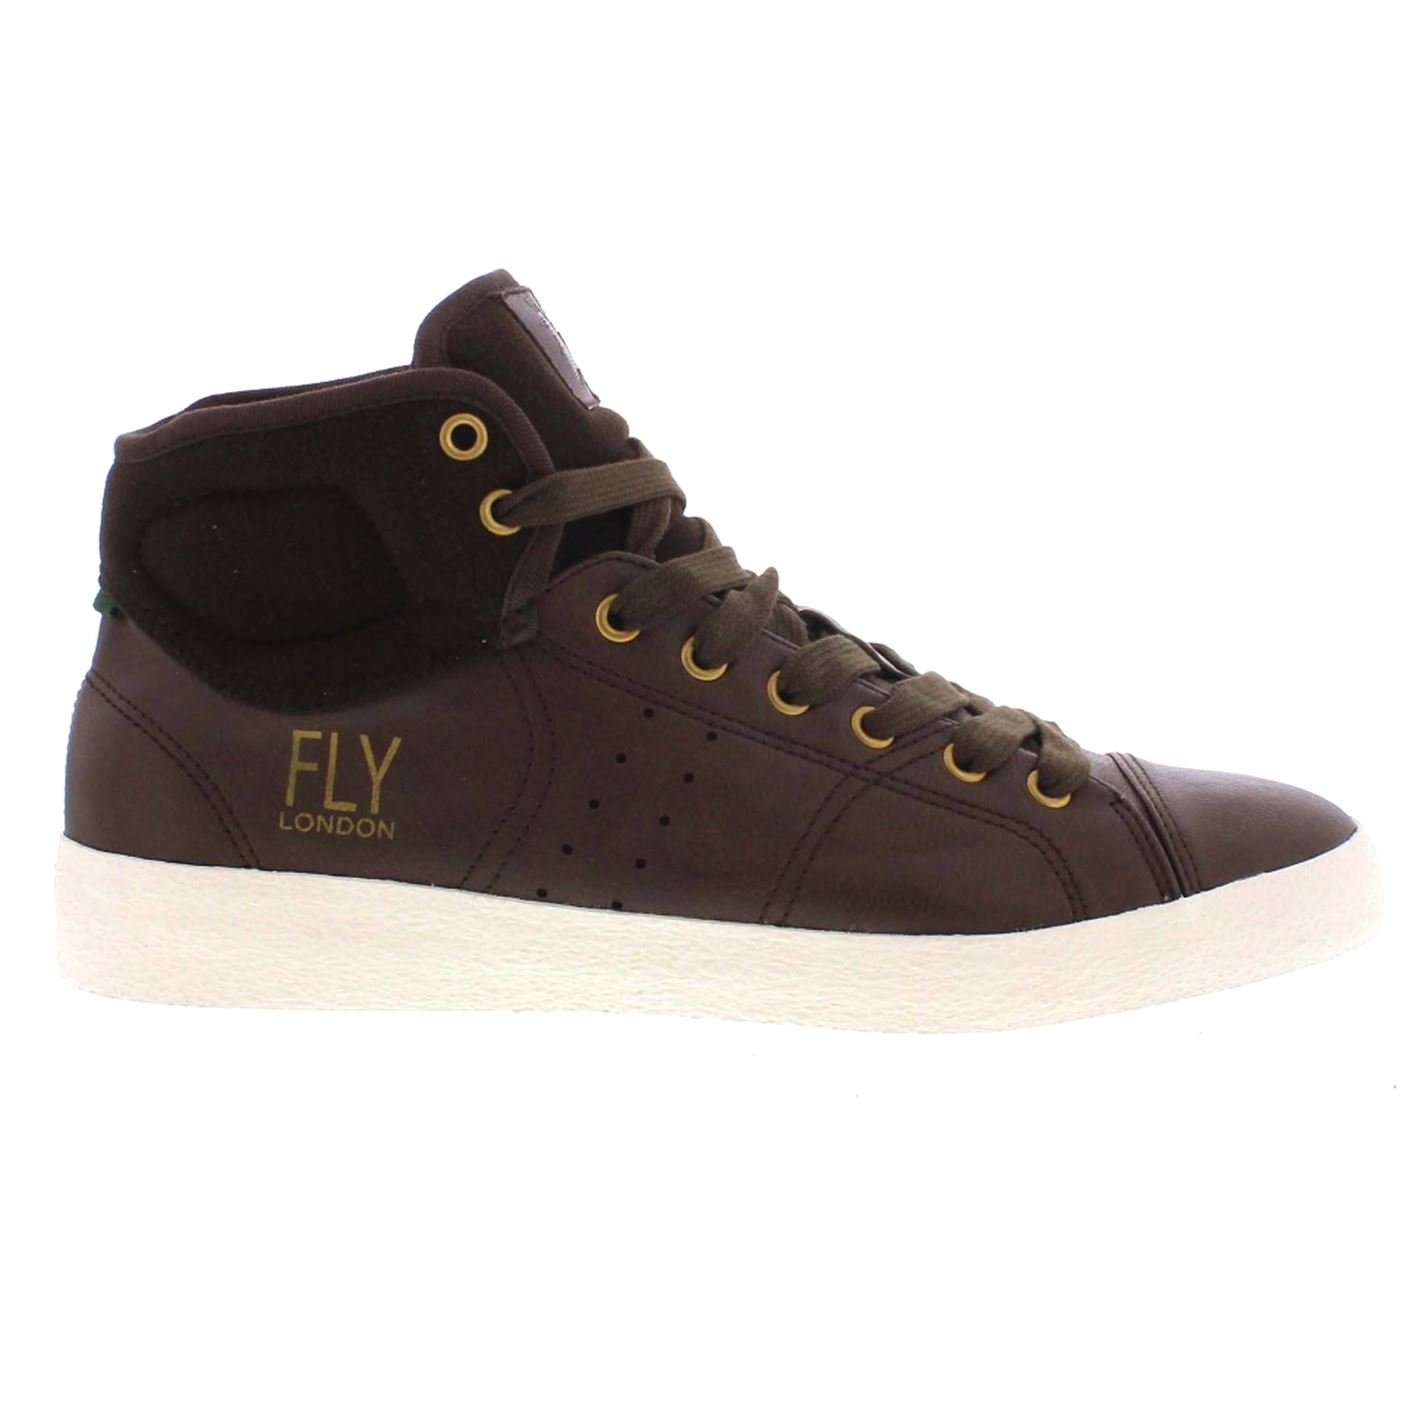 Fly London Balk Trainers